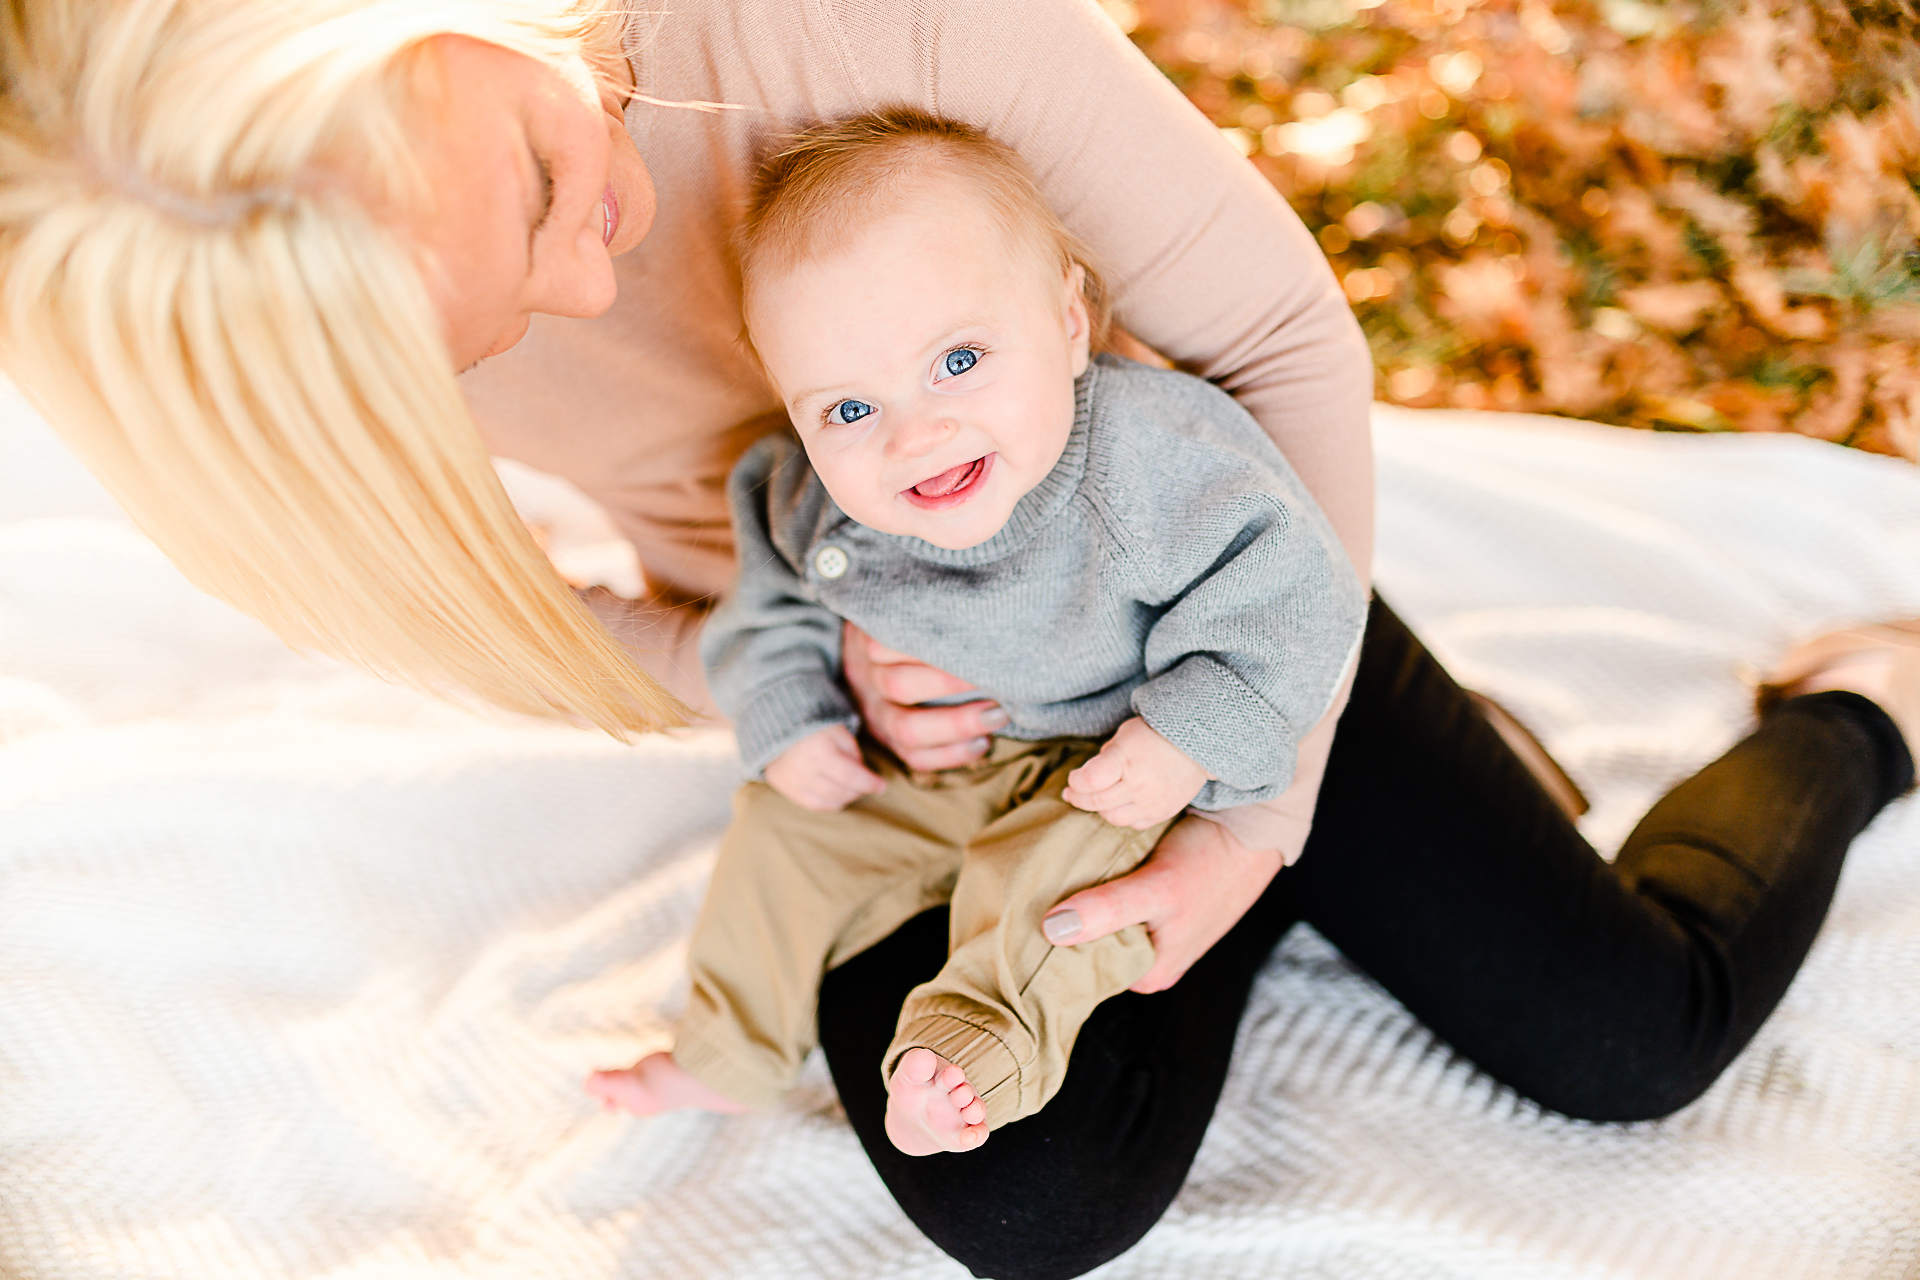 Photo by Norwell Photographer Christina Runnals | Mom holding her baby who is looking up at the camera with big blue eyes and smiling.